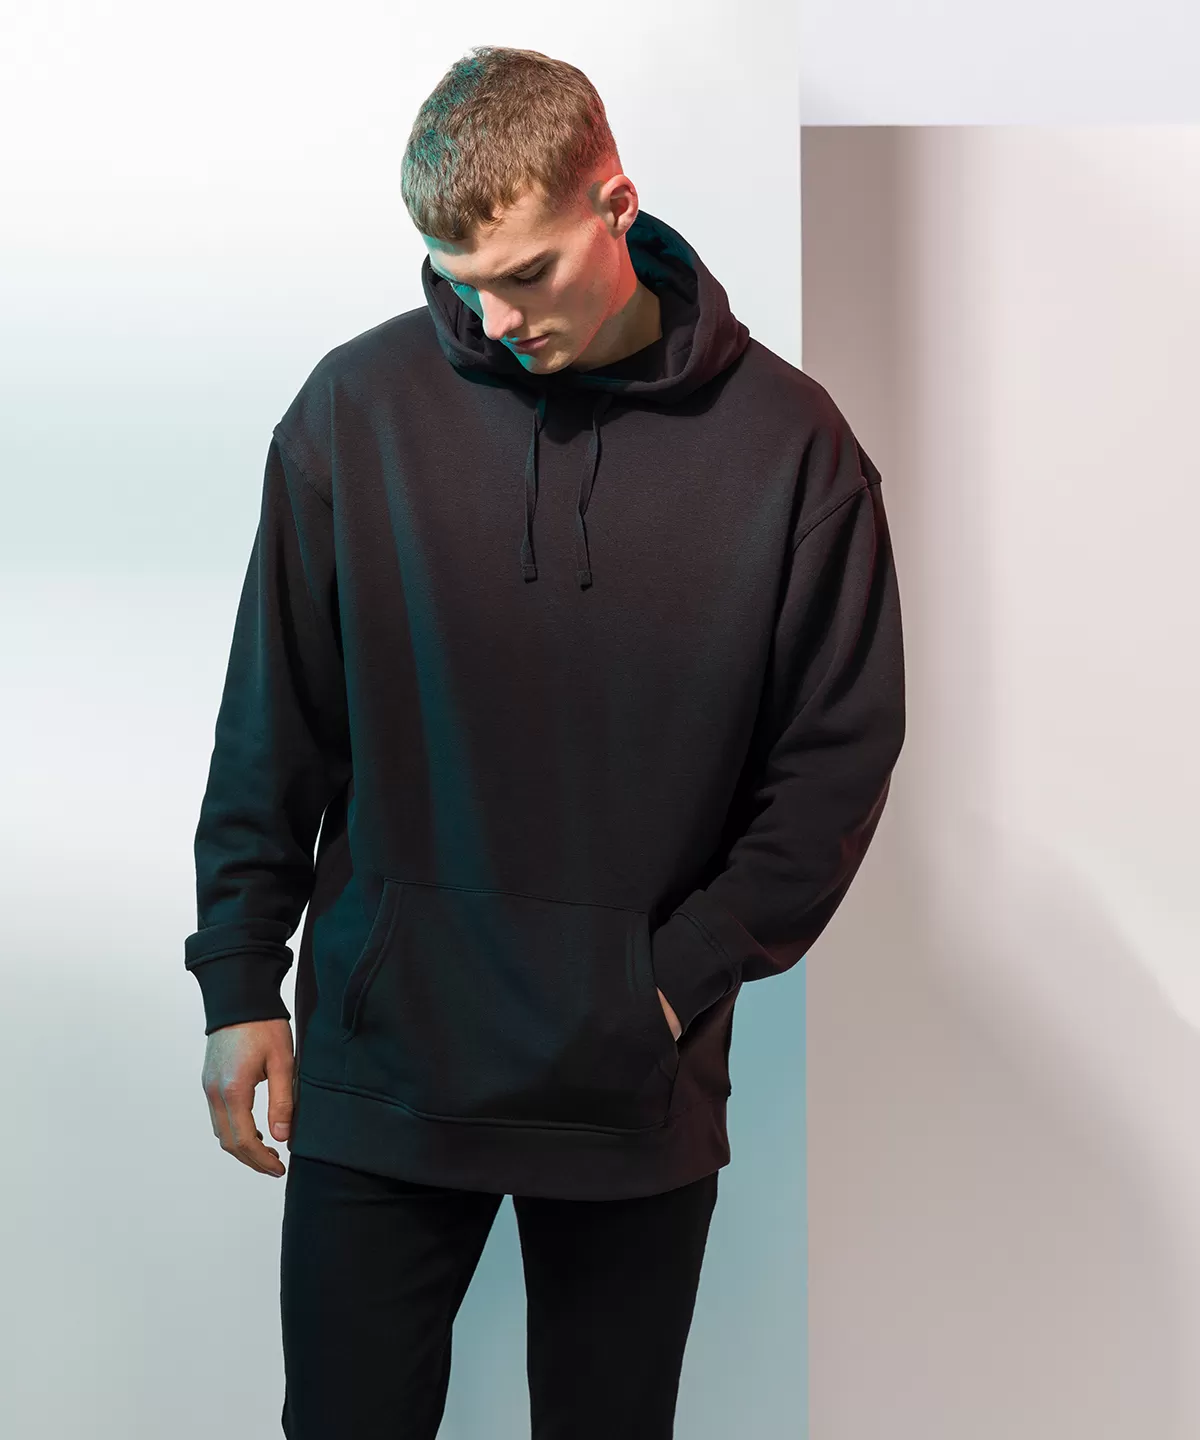 Oversized hoodie for printing